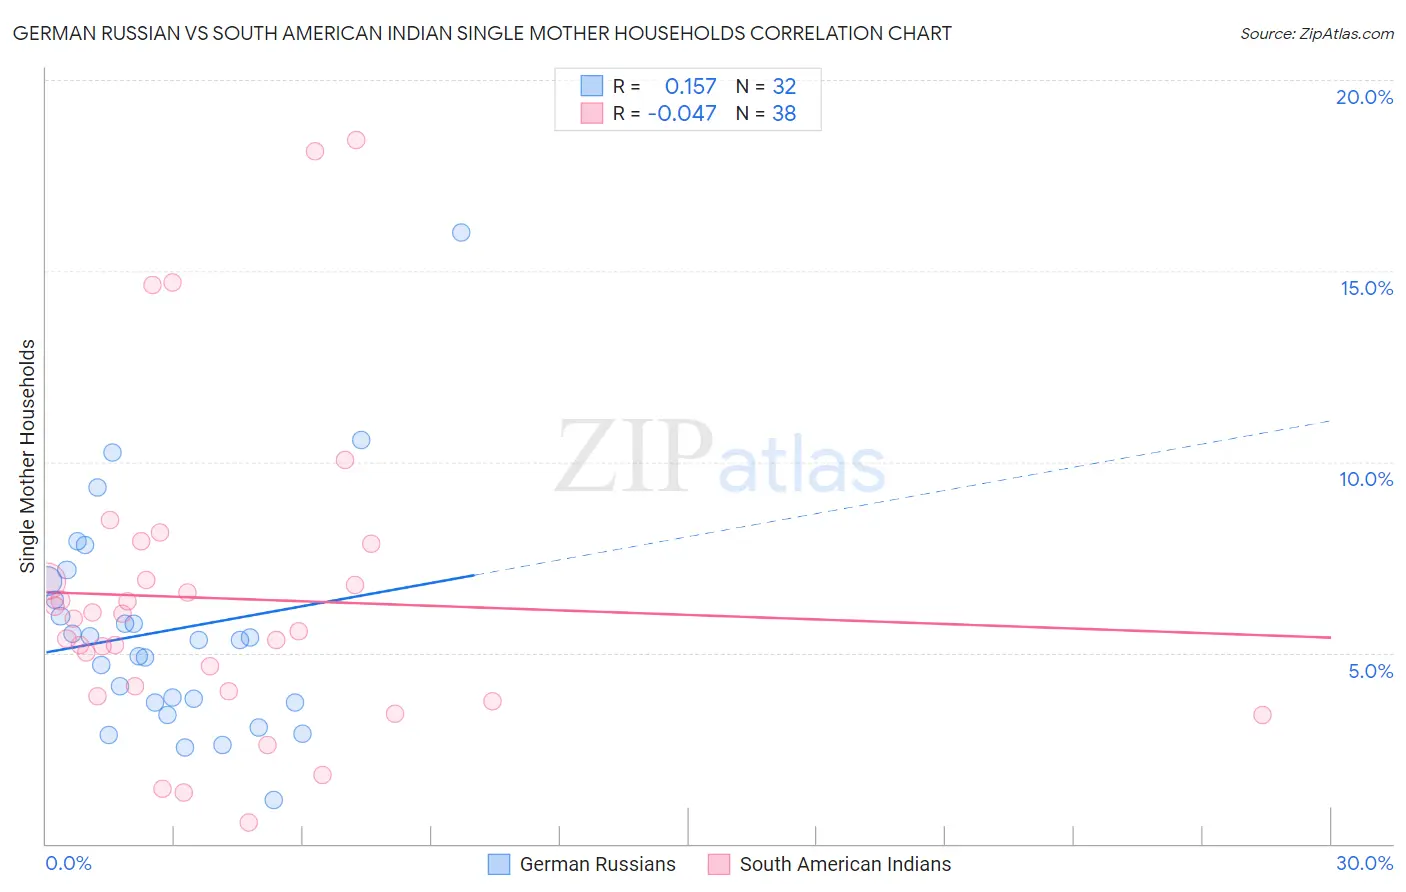 German Russian vs South American Indian Single Mother Households